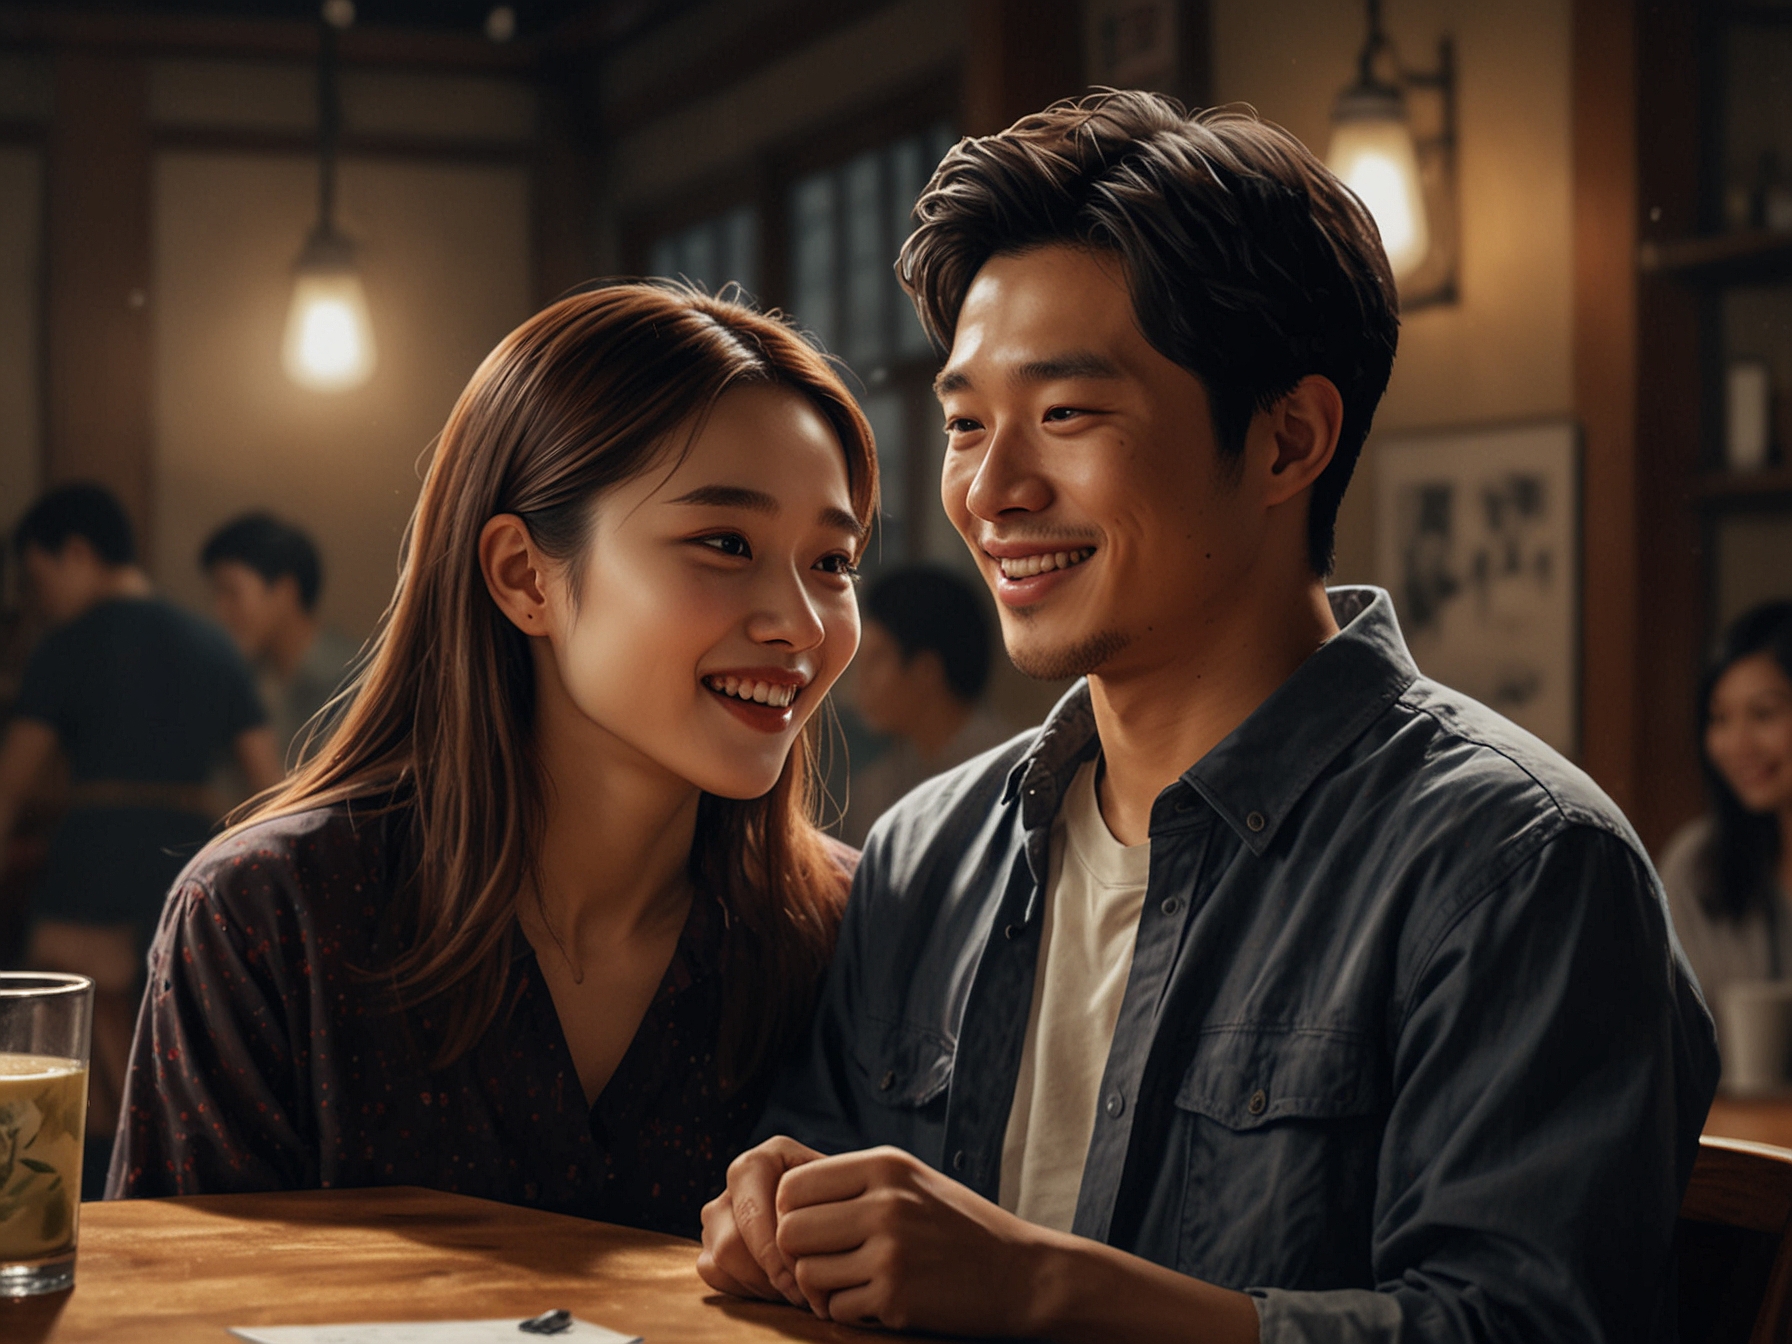 Han Bo Reum and Choi Woong share a heartfelt moment during the wrap party. The joy and sense of accomplishment among the cast and crew are palpable, reflecting their dedication.